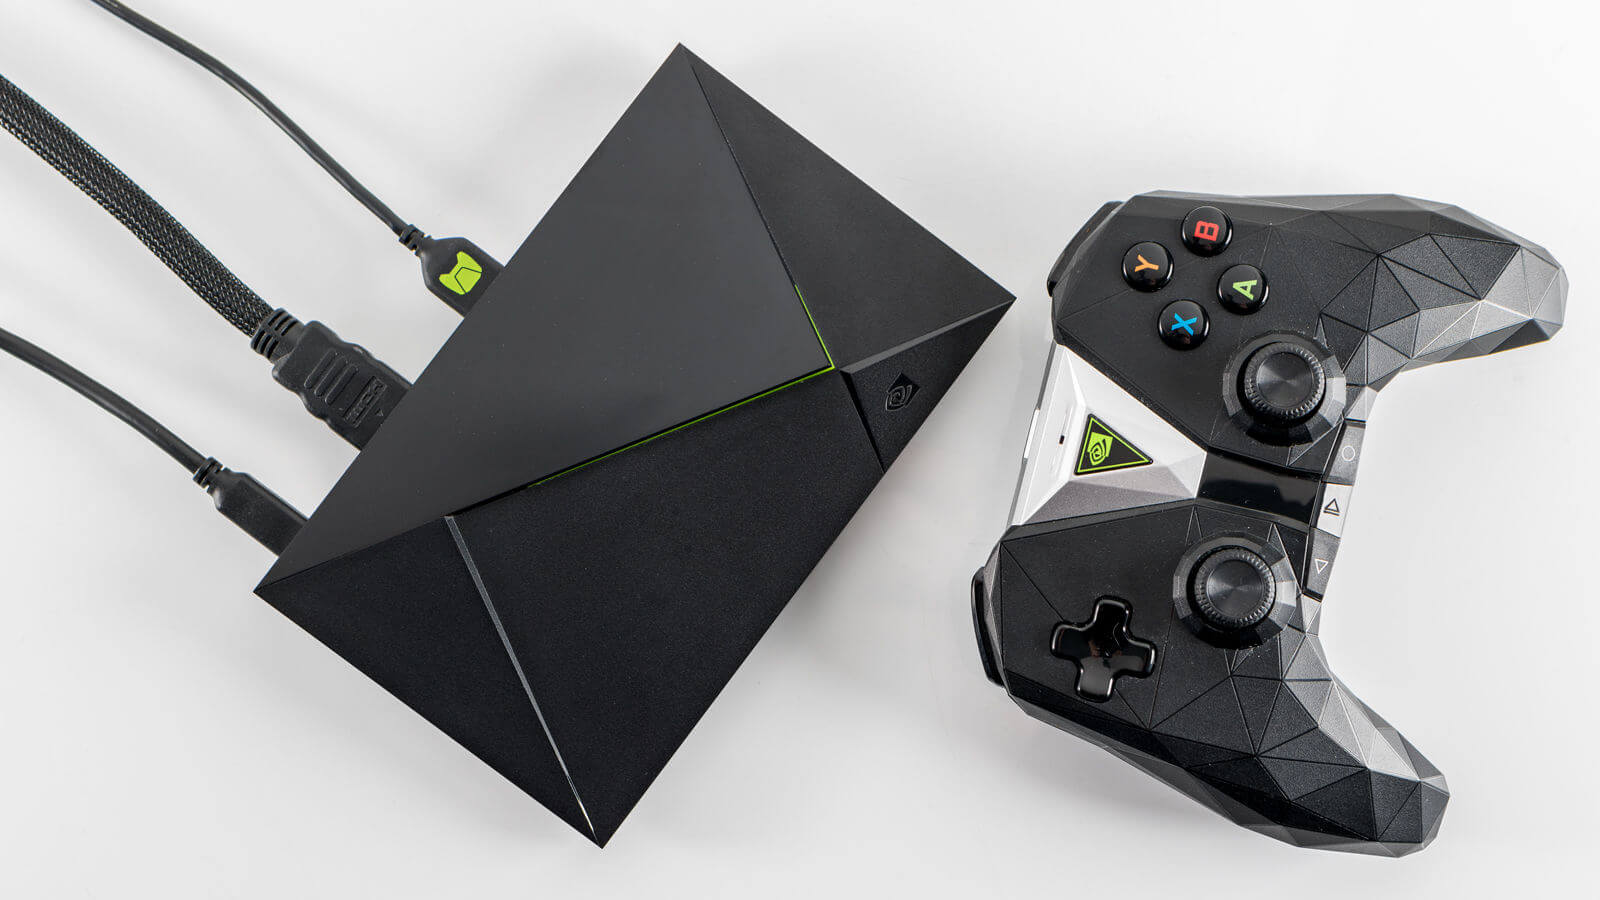 An updated Nvidia Shield TV passes through FCC